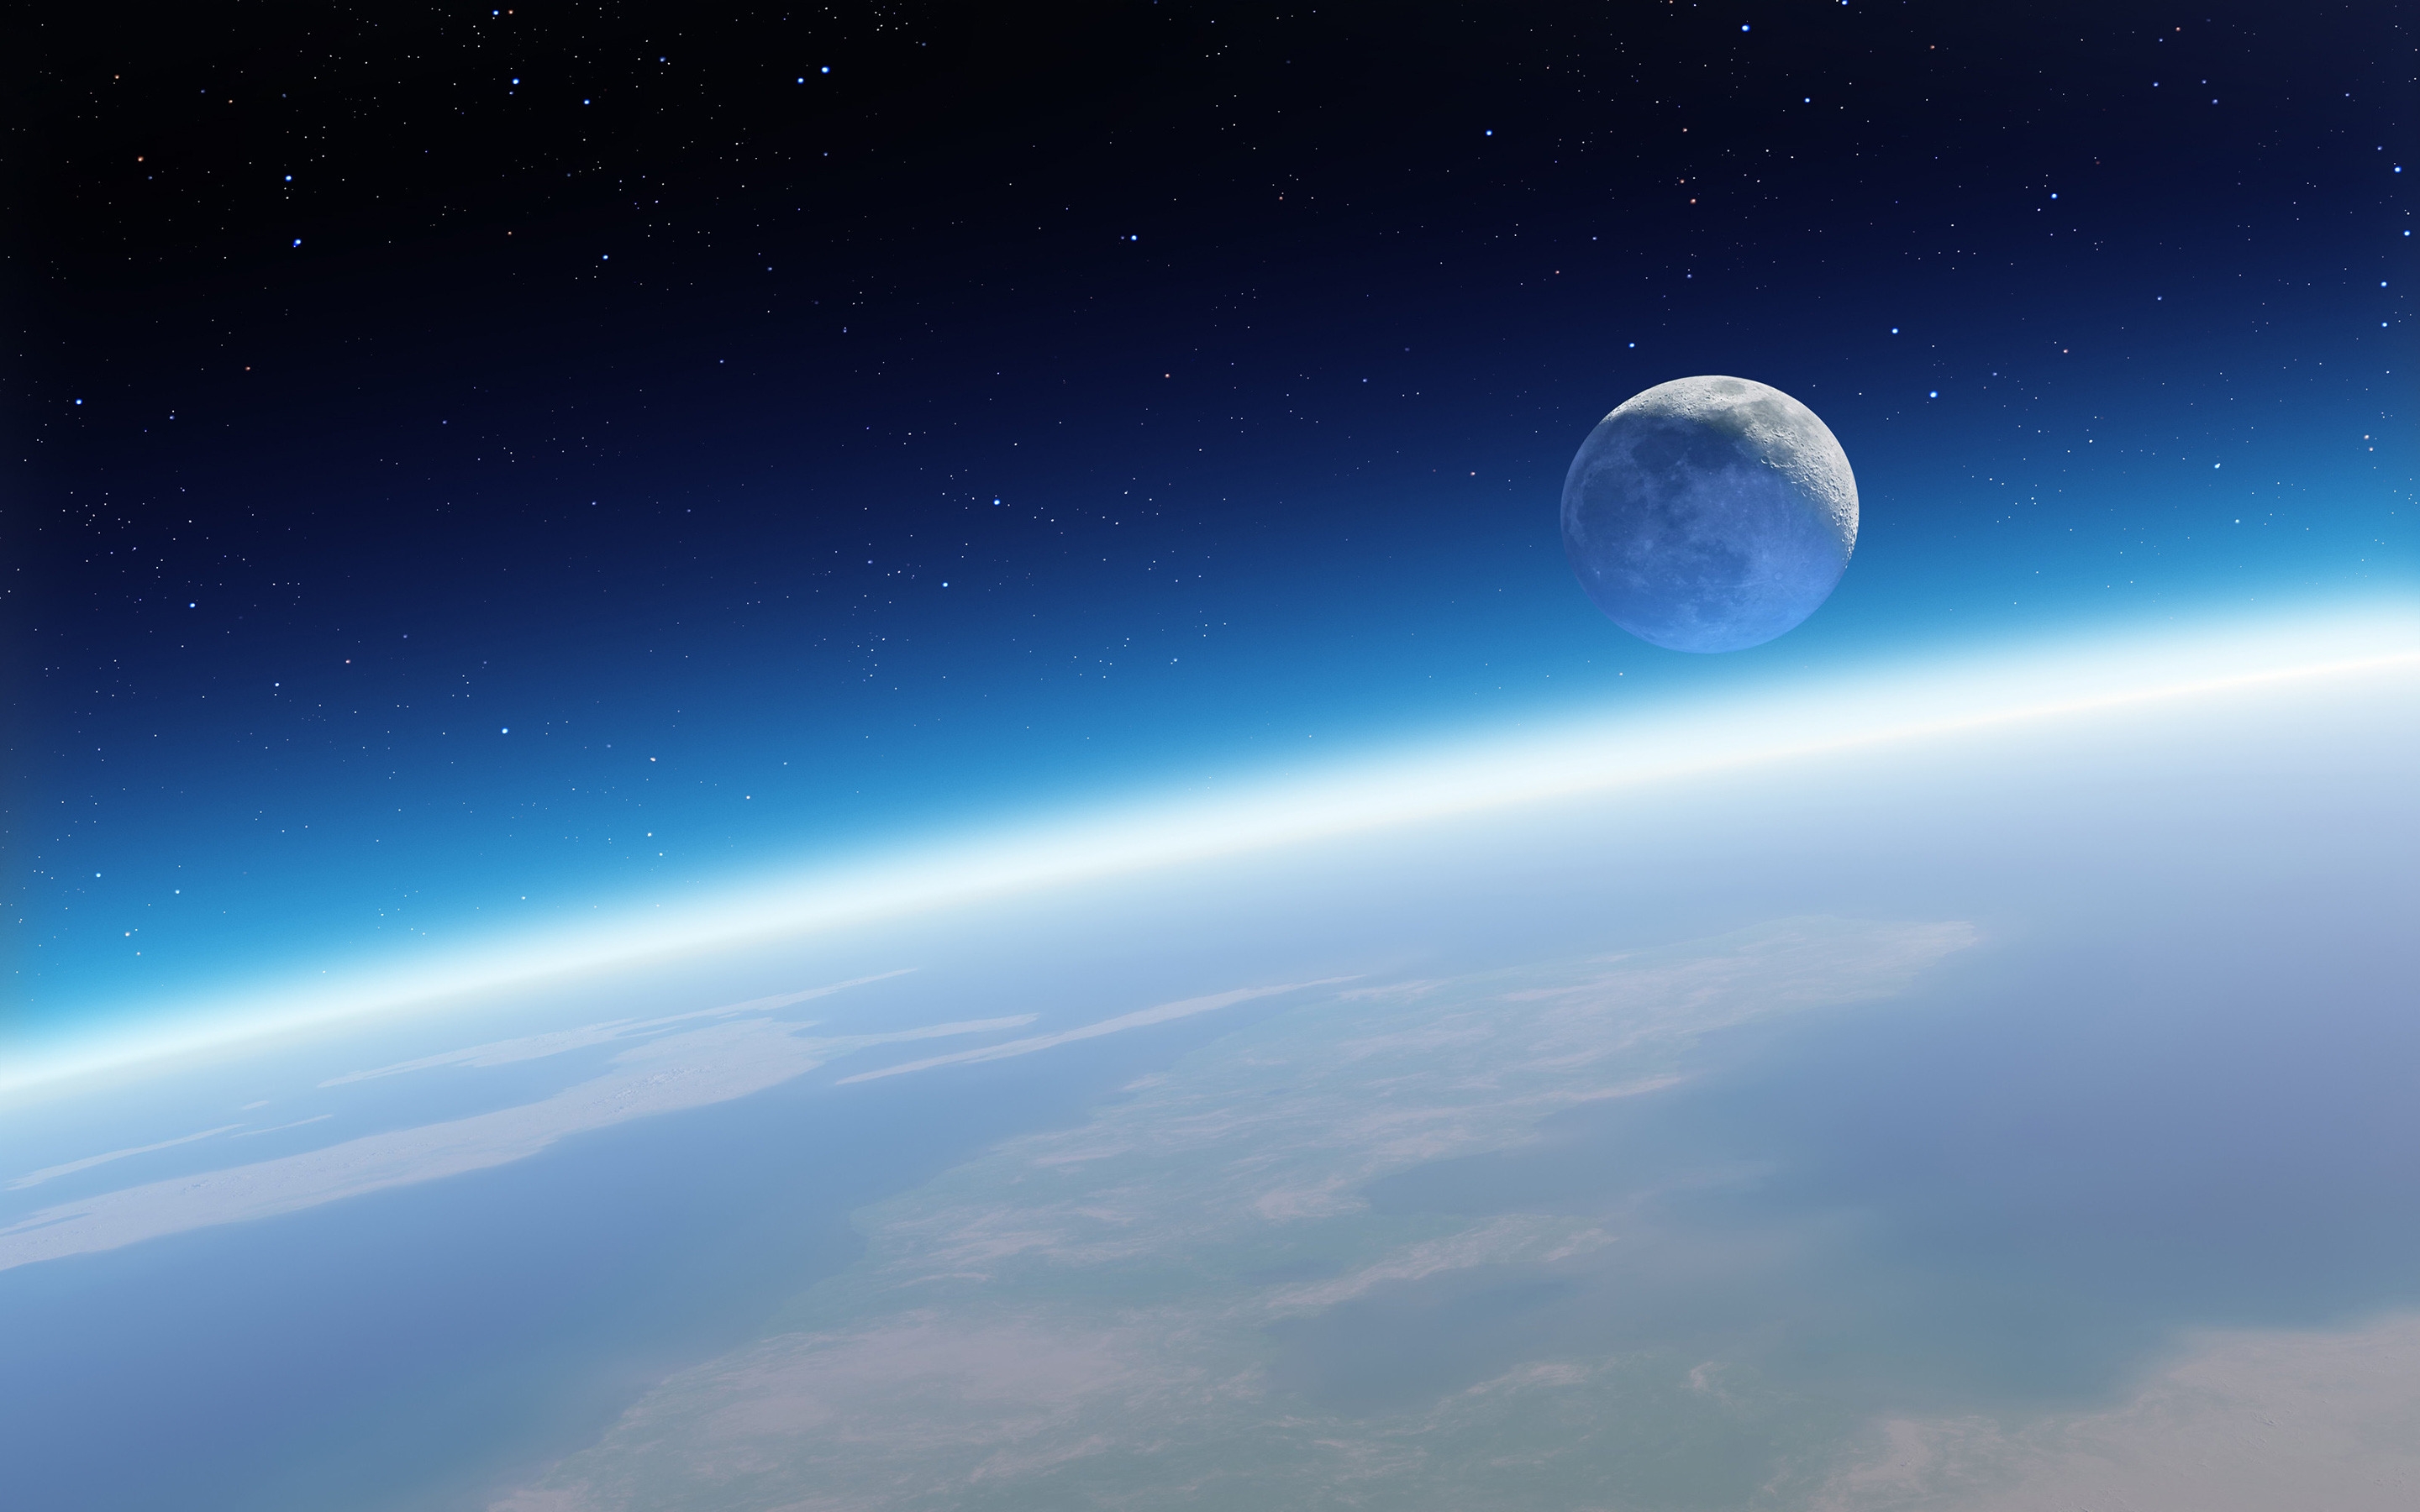 Moon Space View for 2880 x 1800 Retina Display resolution